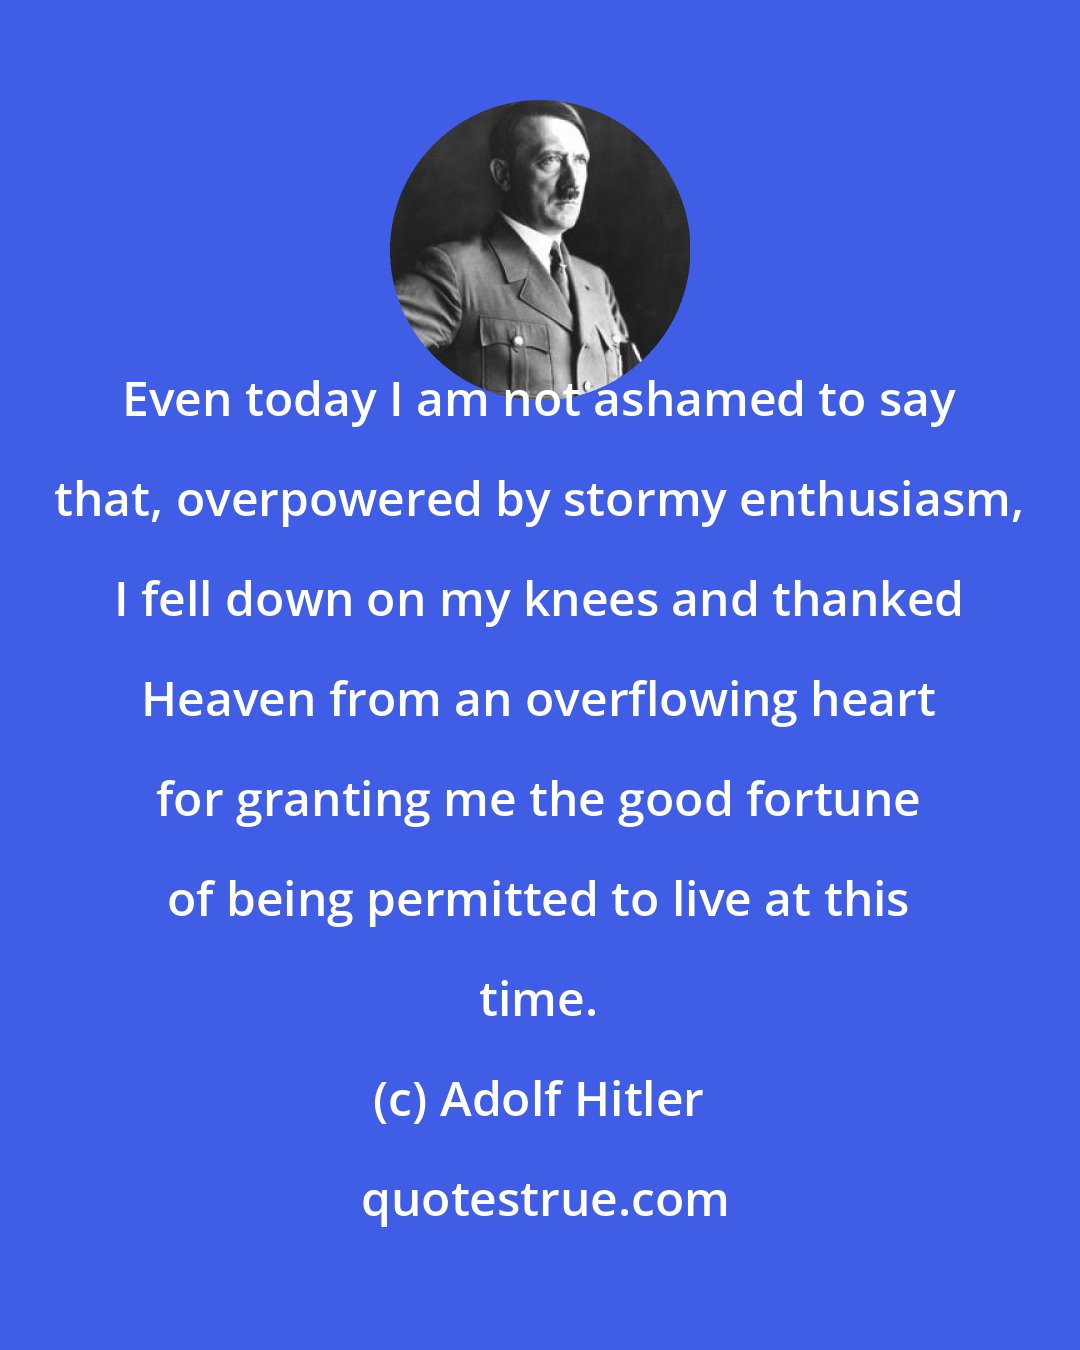 Adolf Hitler: Even today I am not ashamed to say that, overpowered by stormy enthusiasm, I fell down on my knees and thanked Heaven from an overflowing heart for granting me the good fortune of being permitted to live at this time.